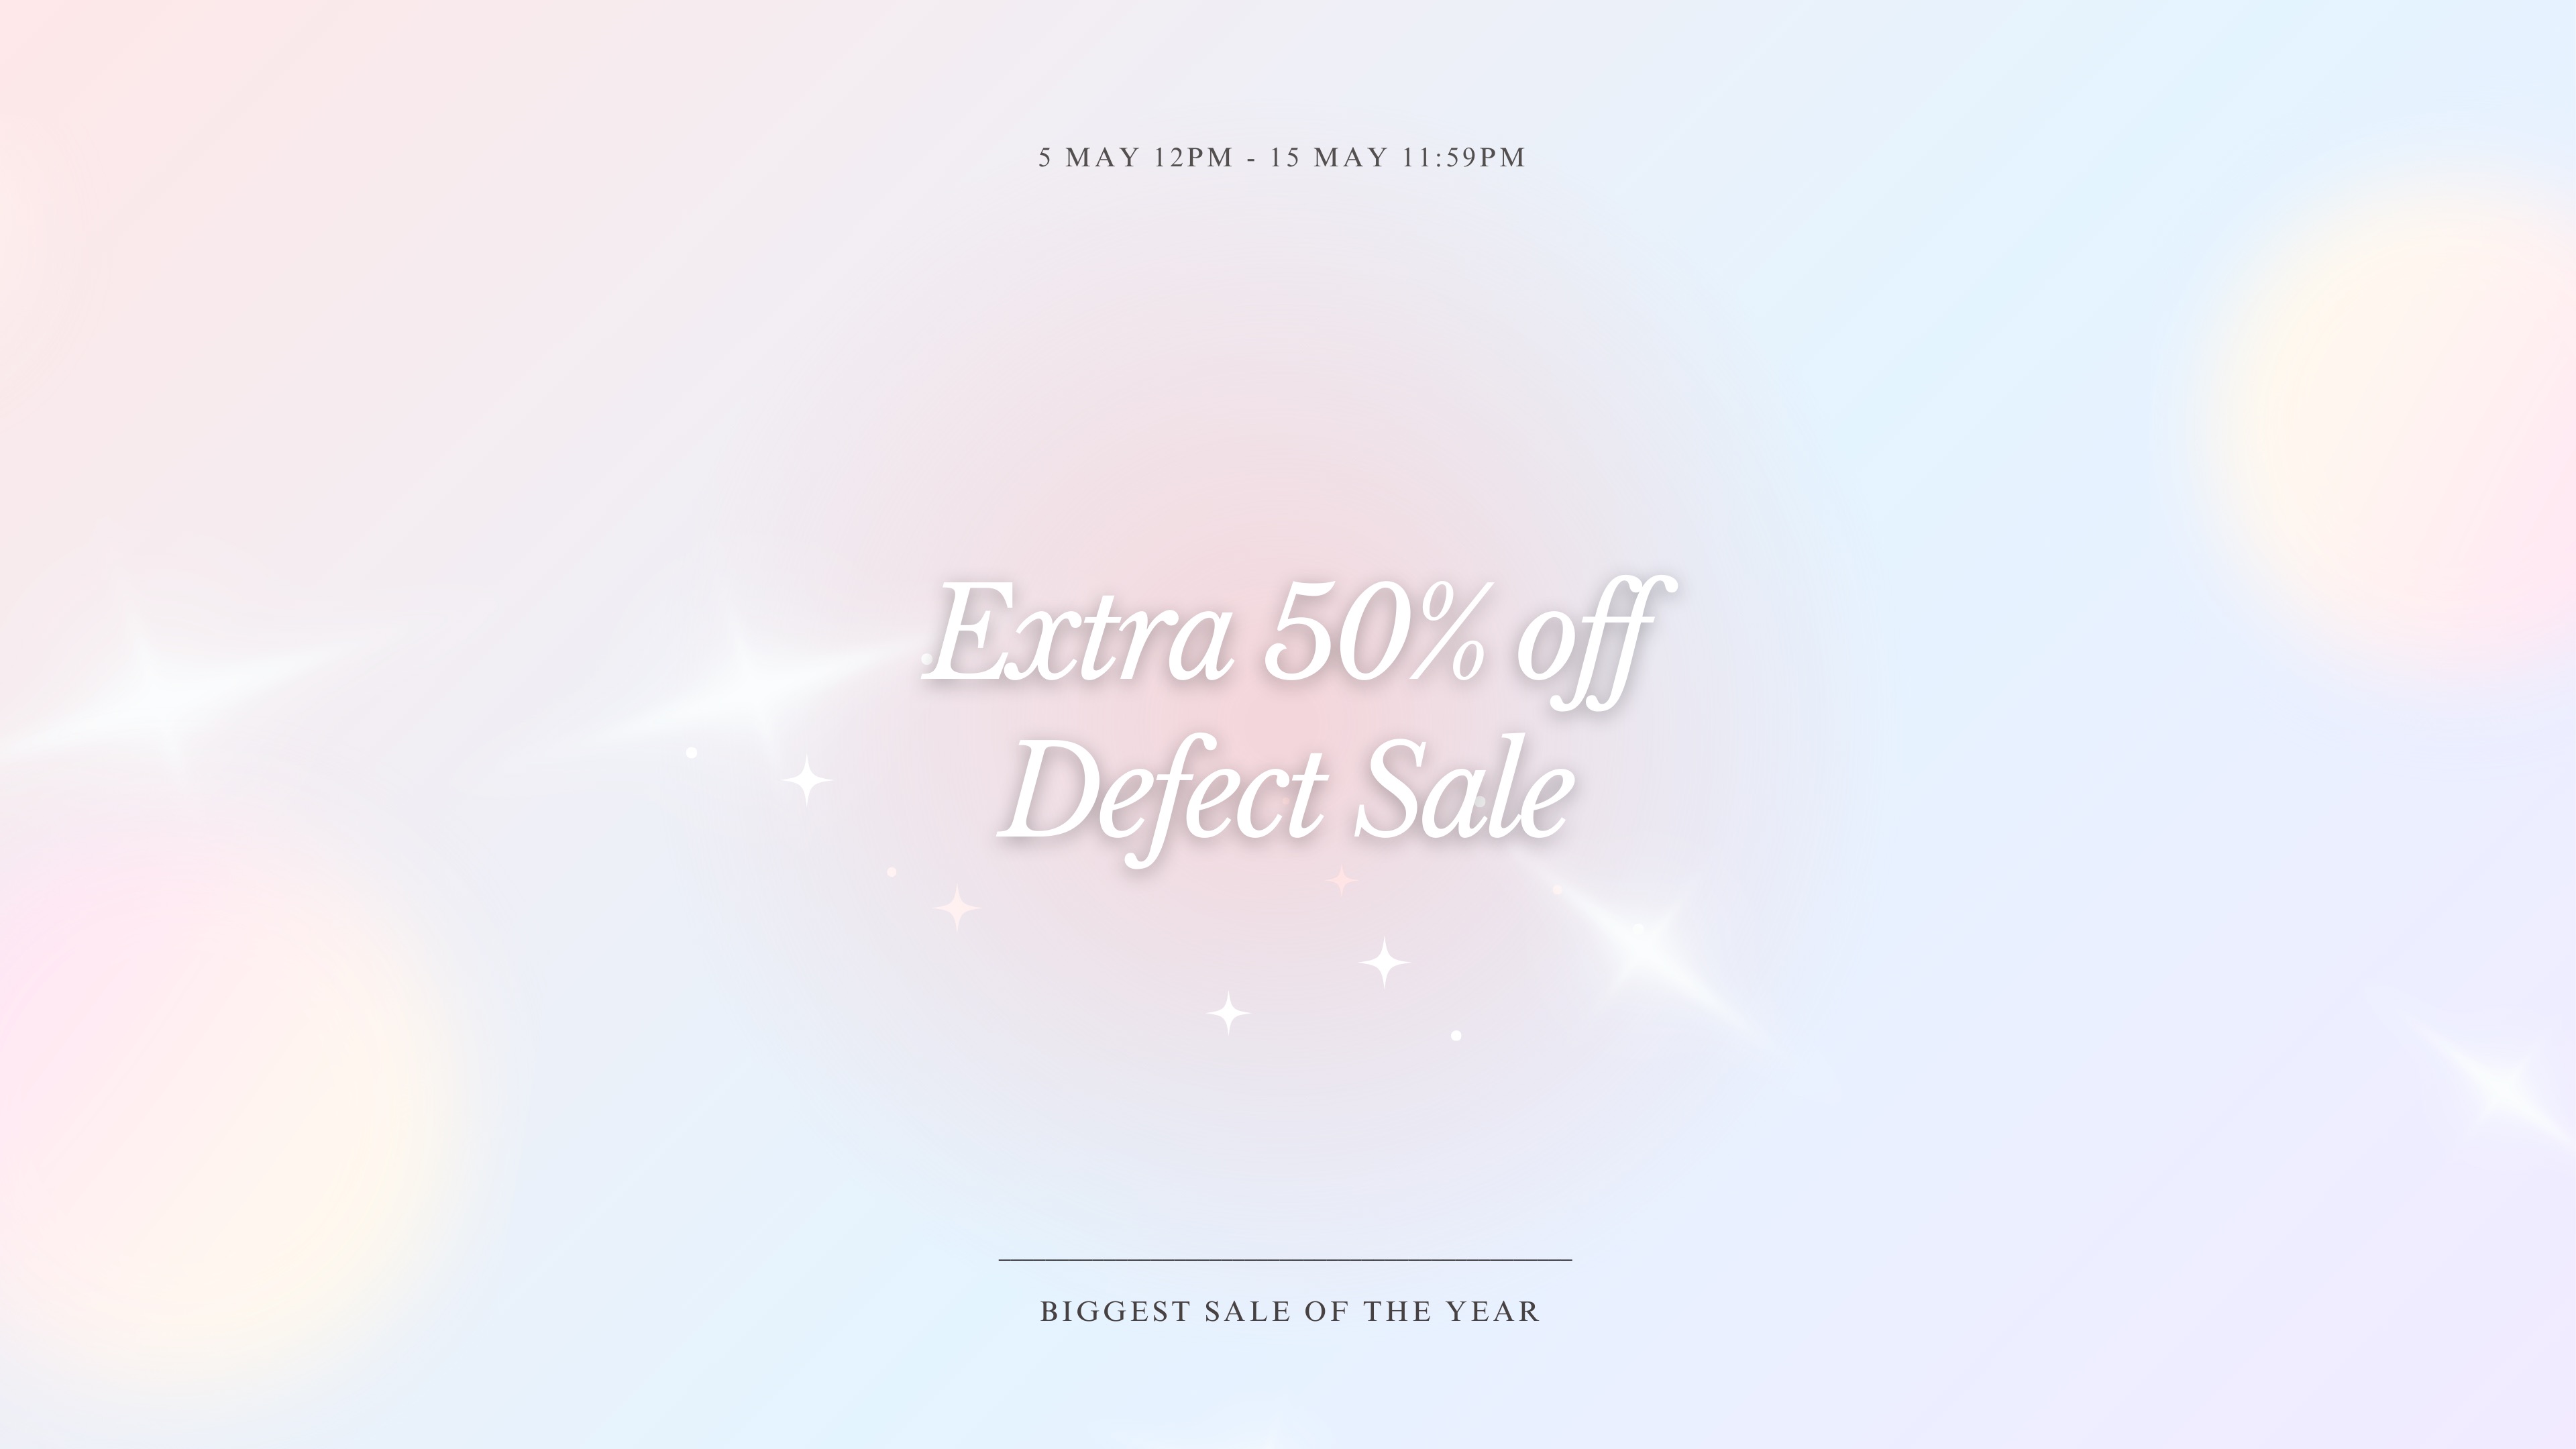 EXTRA 50% OFF DEFECTS